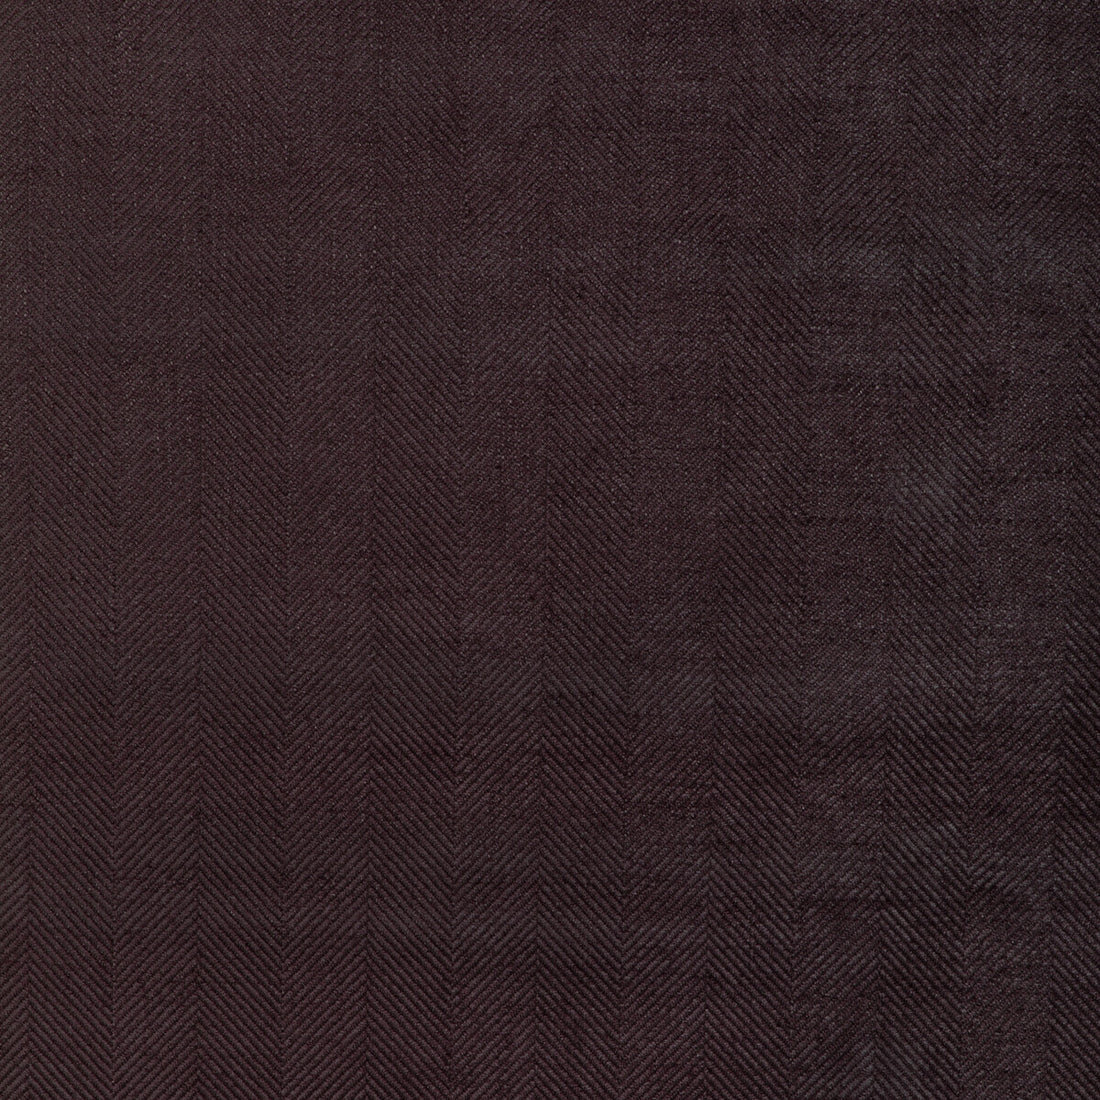 Rhone Weave fabric in plum color - pattern 8023133.10.0 - by Brunschwig &amp; Fils in the Arles Weaves collection